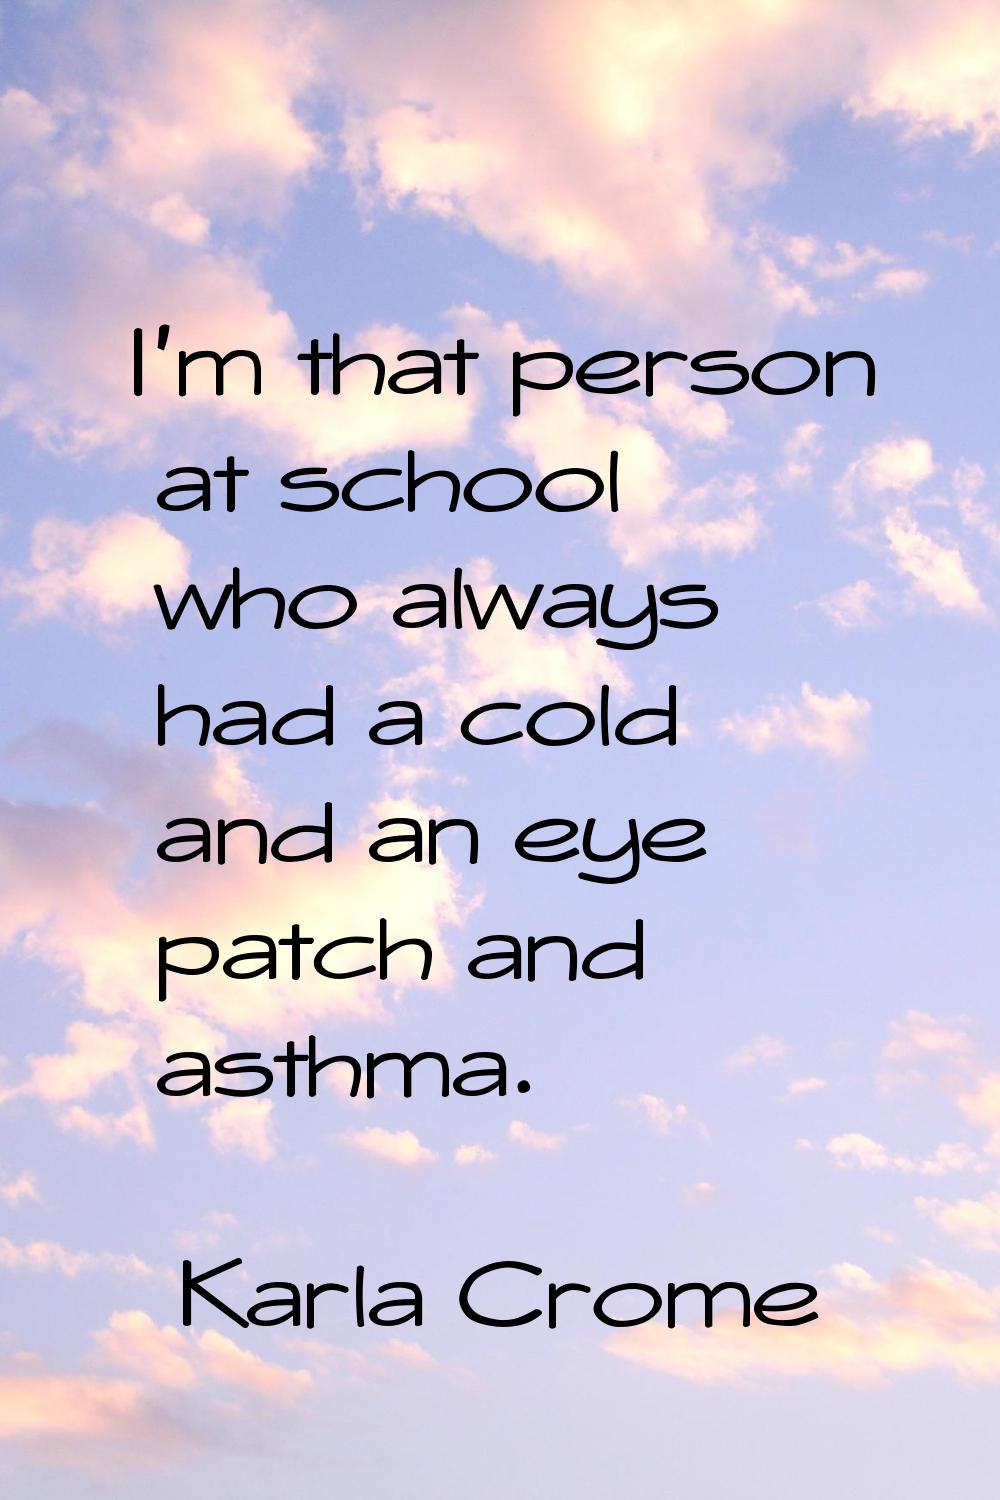 I'm that person at school who always had a cold and an eye patch and asthma.